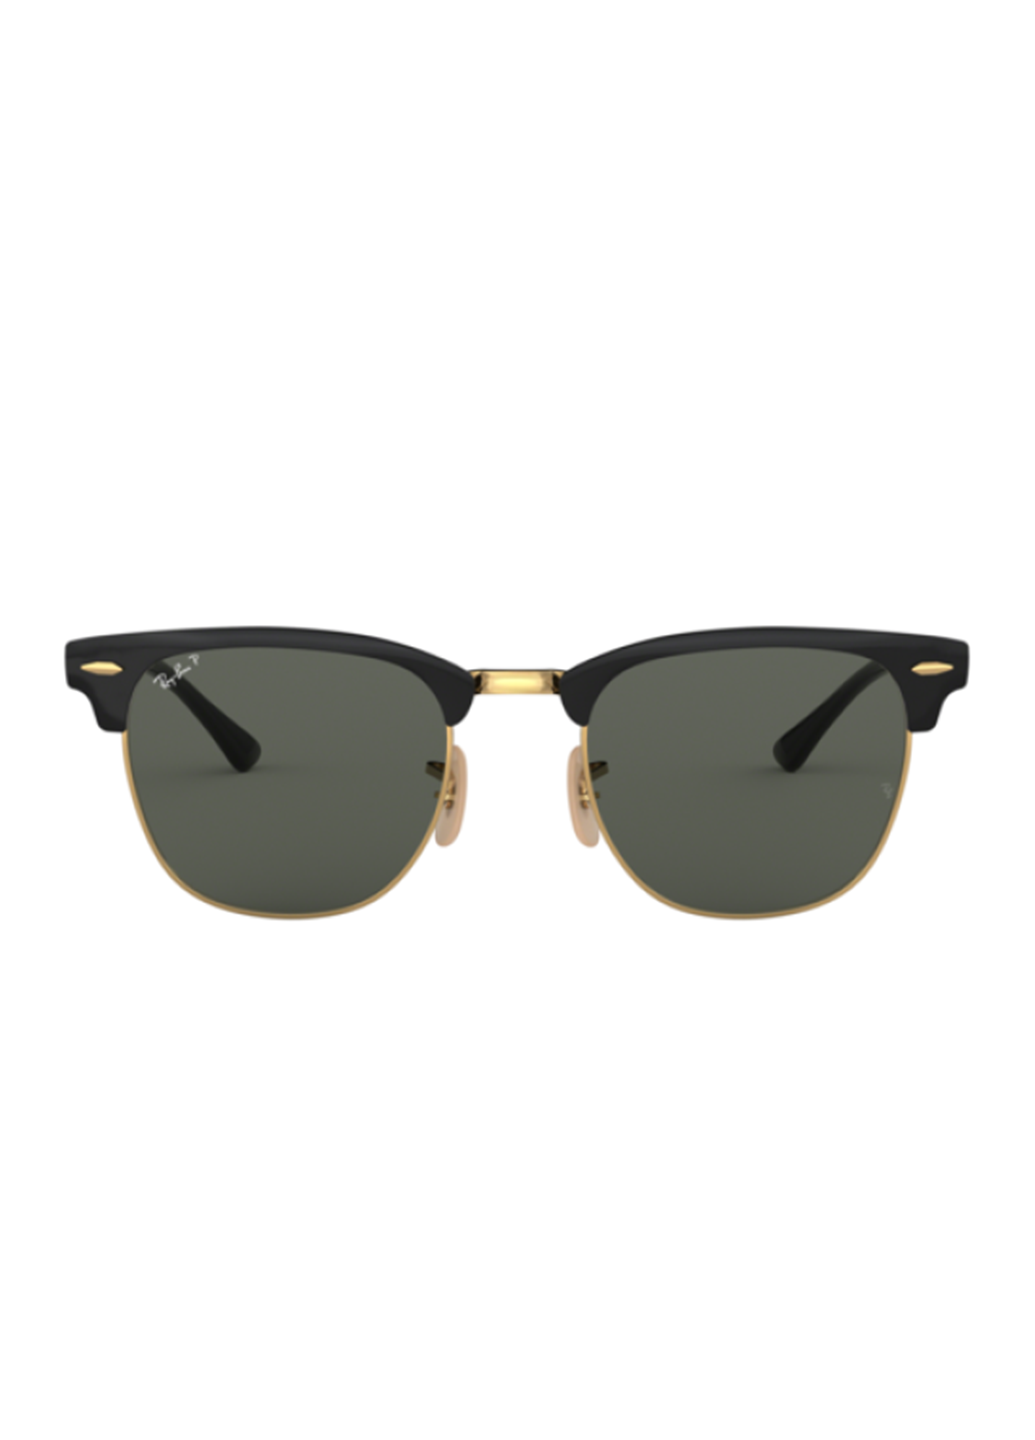 Ray-Ban Clubmaster Metal RB 3716 (187/58)